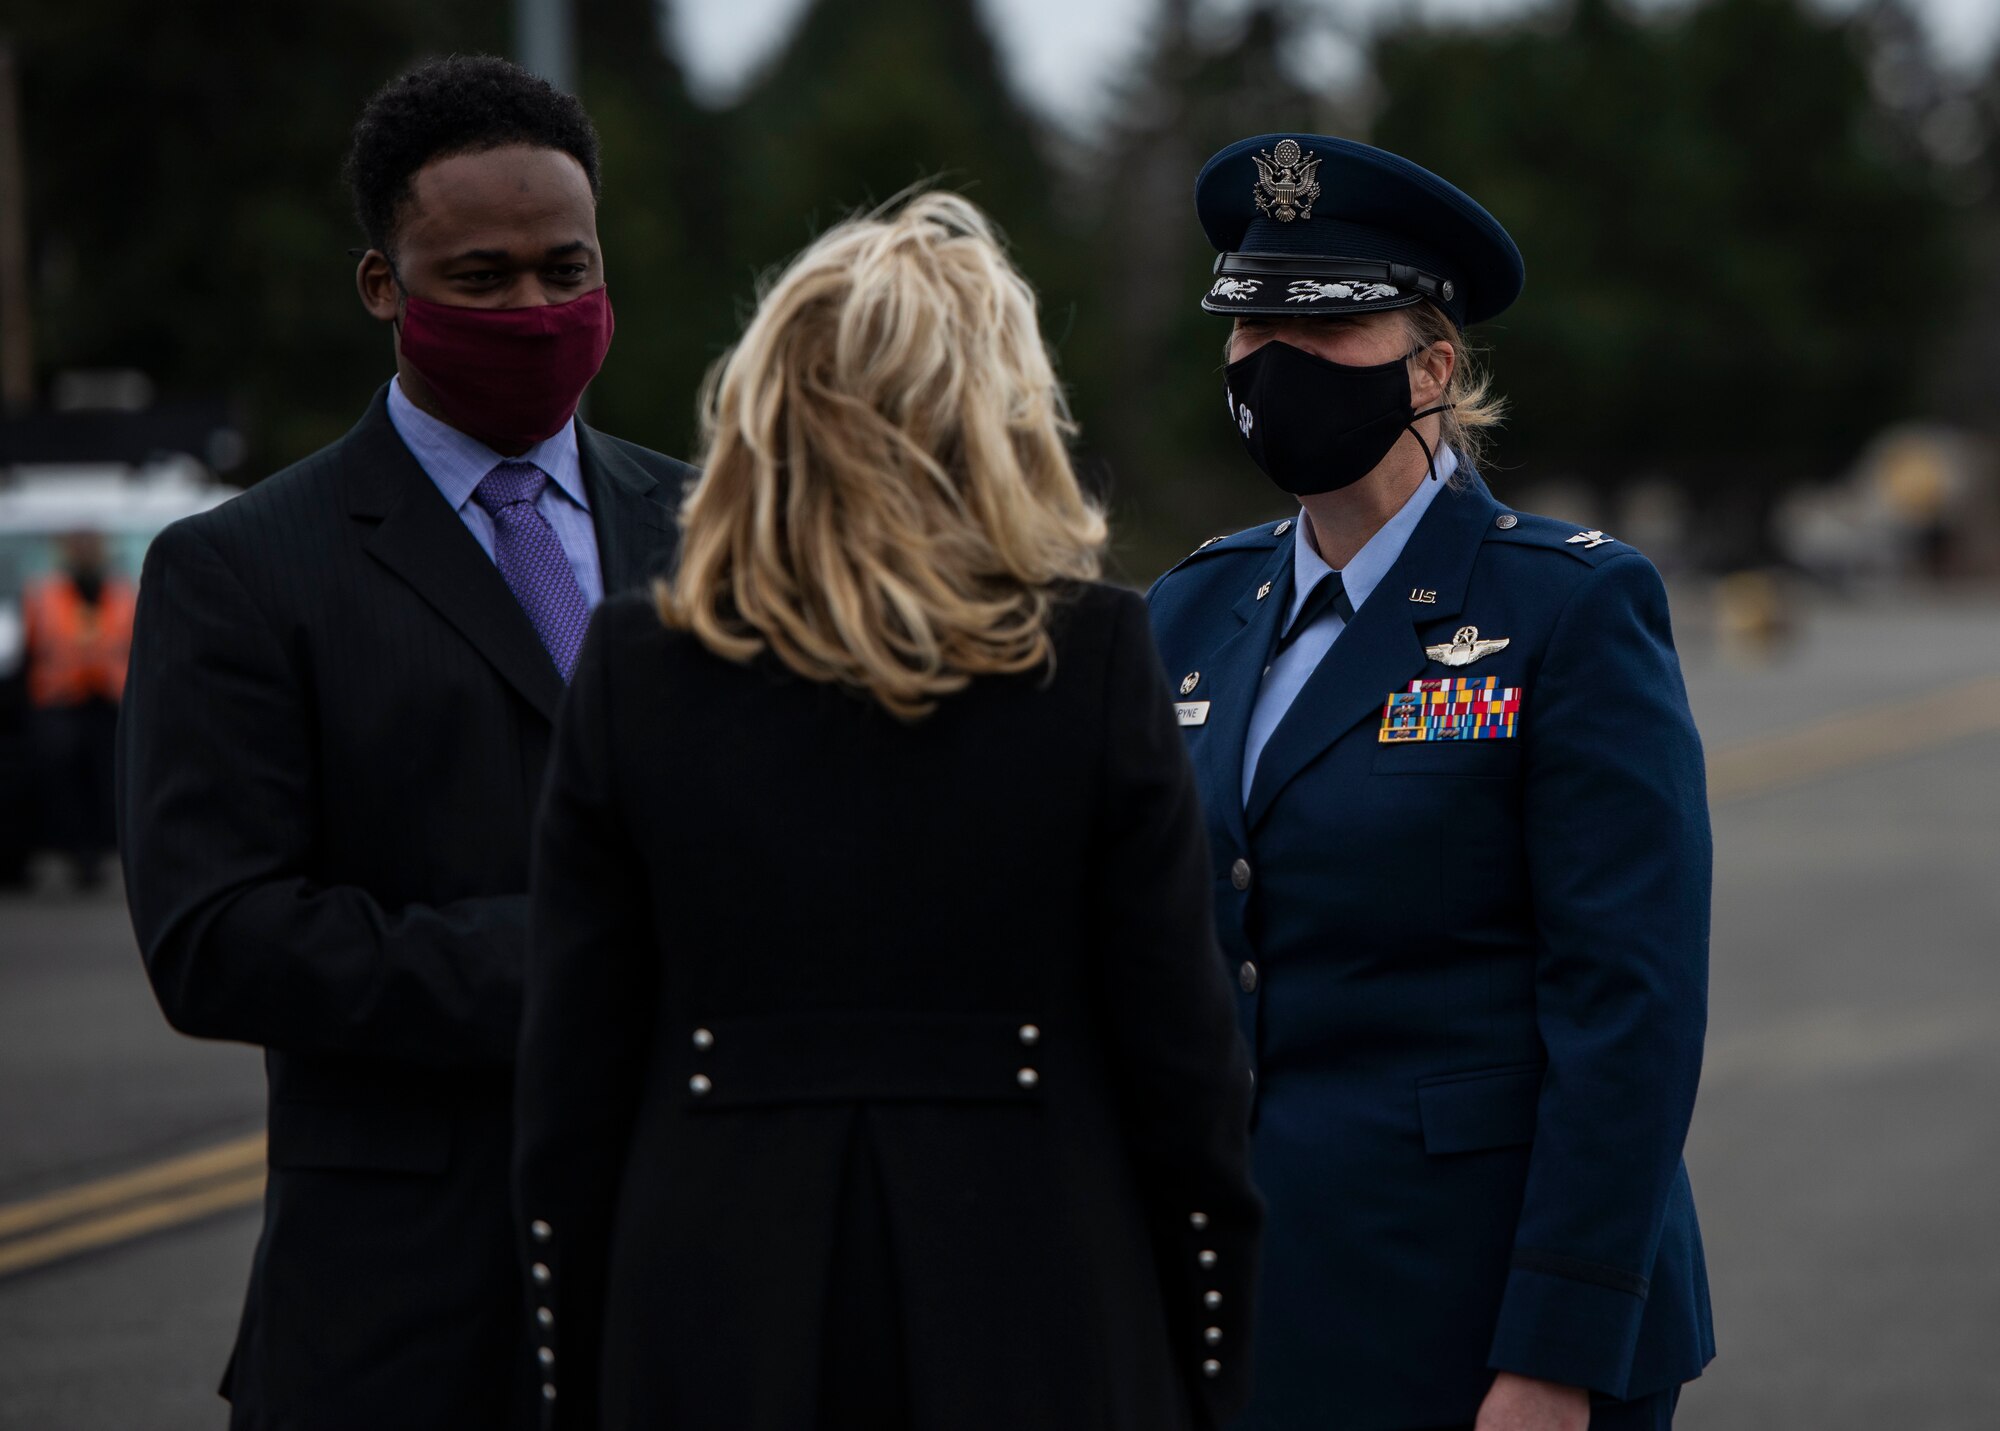 First Lady Dr. Jill Biden is greeted by U.S. Air Force Col. Erin Staine-Pyne, commander of the 62nd Airlift Wing, and her spouse, Frank Staine-Pyne, at Joint Base Lewis-McChord, Washington, March 8, 2021. Biden visited with military families as part of an on-going effort to relaunch Joining Forces, an initiative to support service members, veterans and their families through wellness, education, and employment opportunities. (U.S. Air Force photo by Staff Sgt. Rachel Williams)